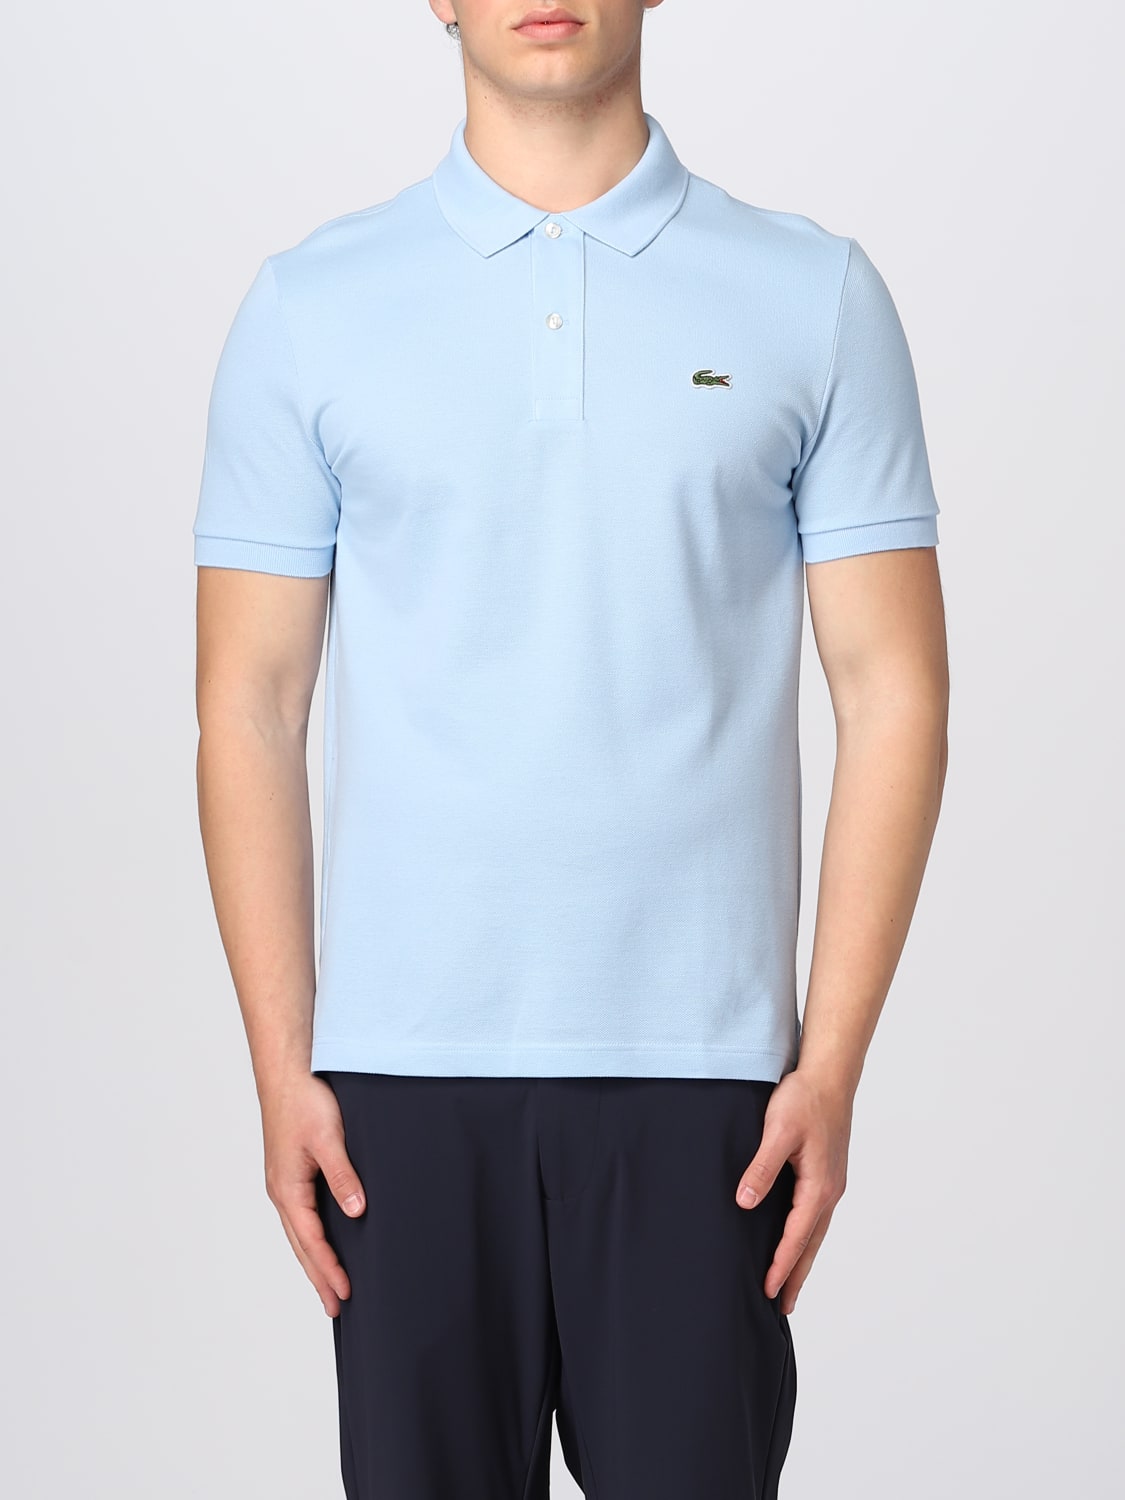 Lacoste Outlet: polo shirt man - Sky Blue | Lacoste polo shirt PH4012 online at GIGLIO.COM